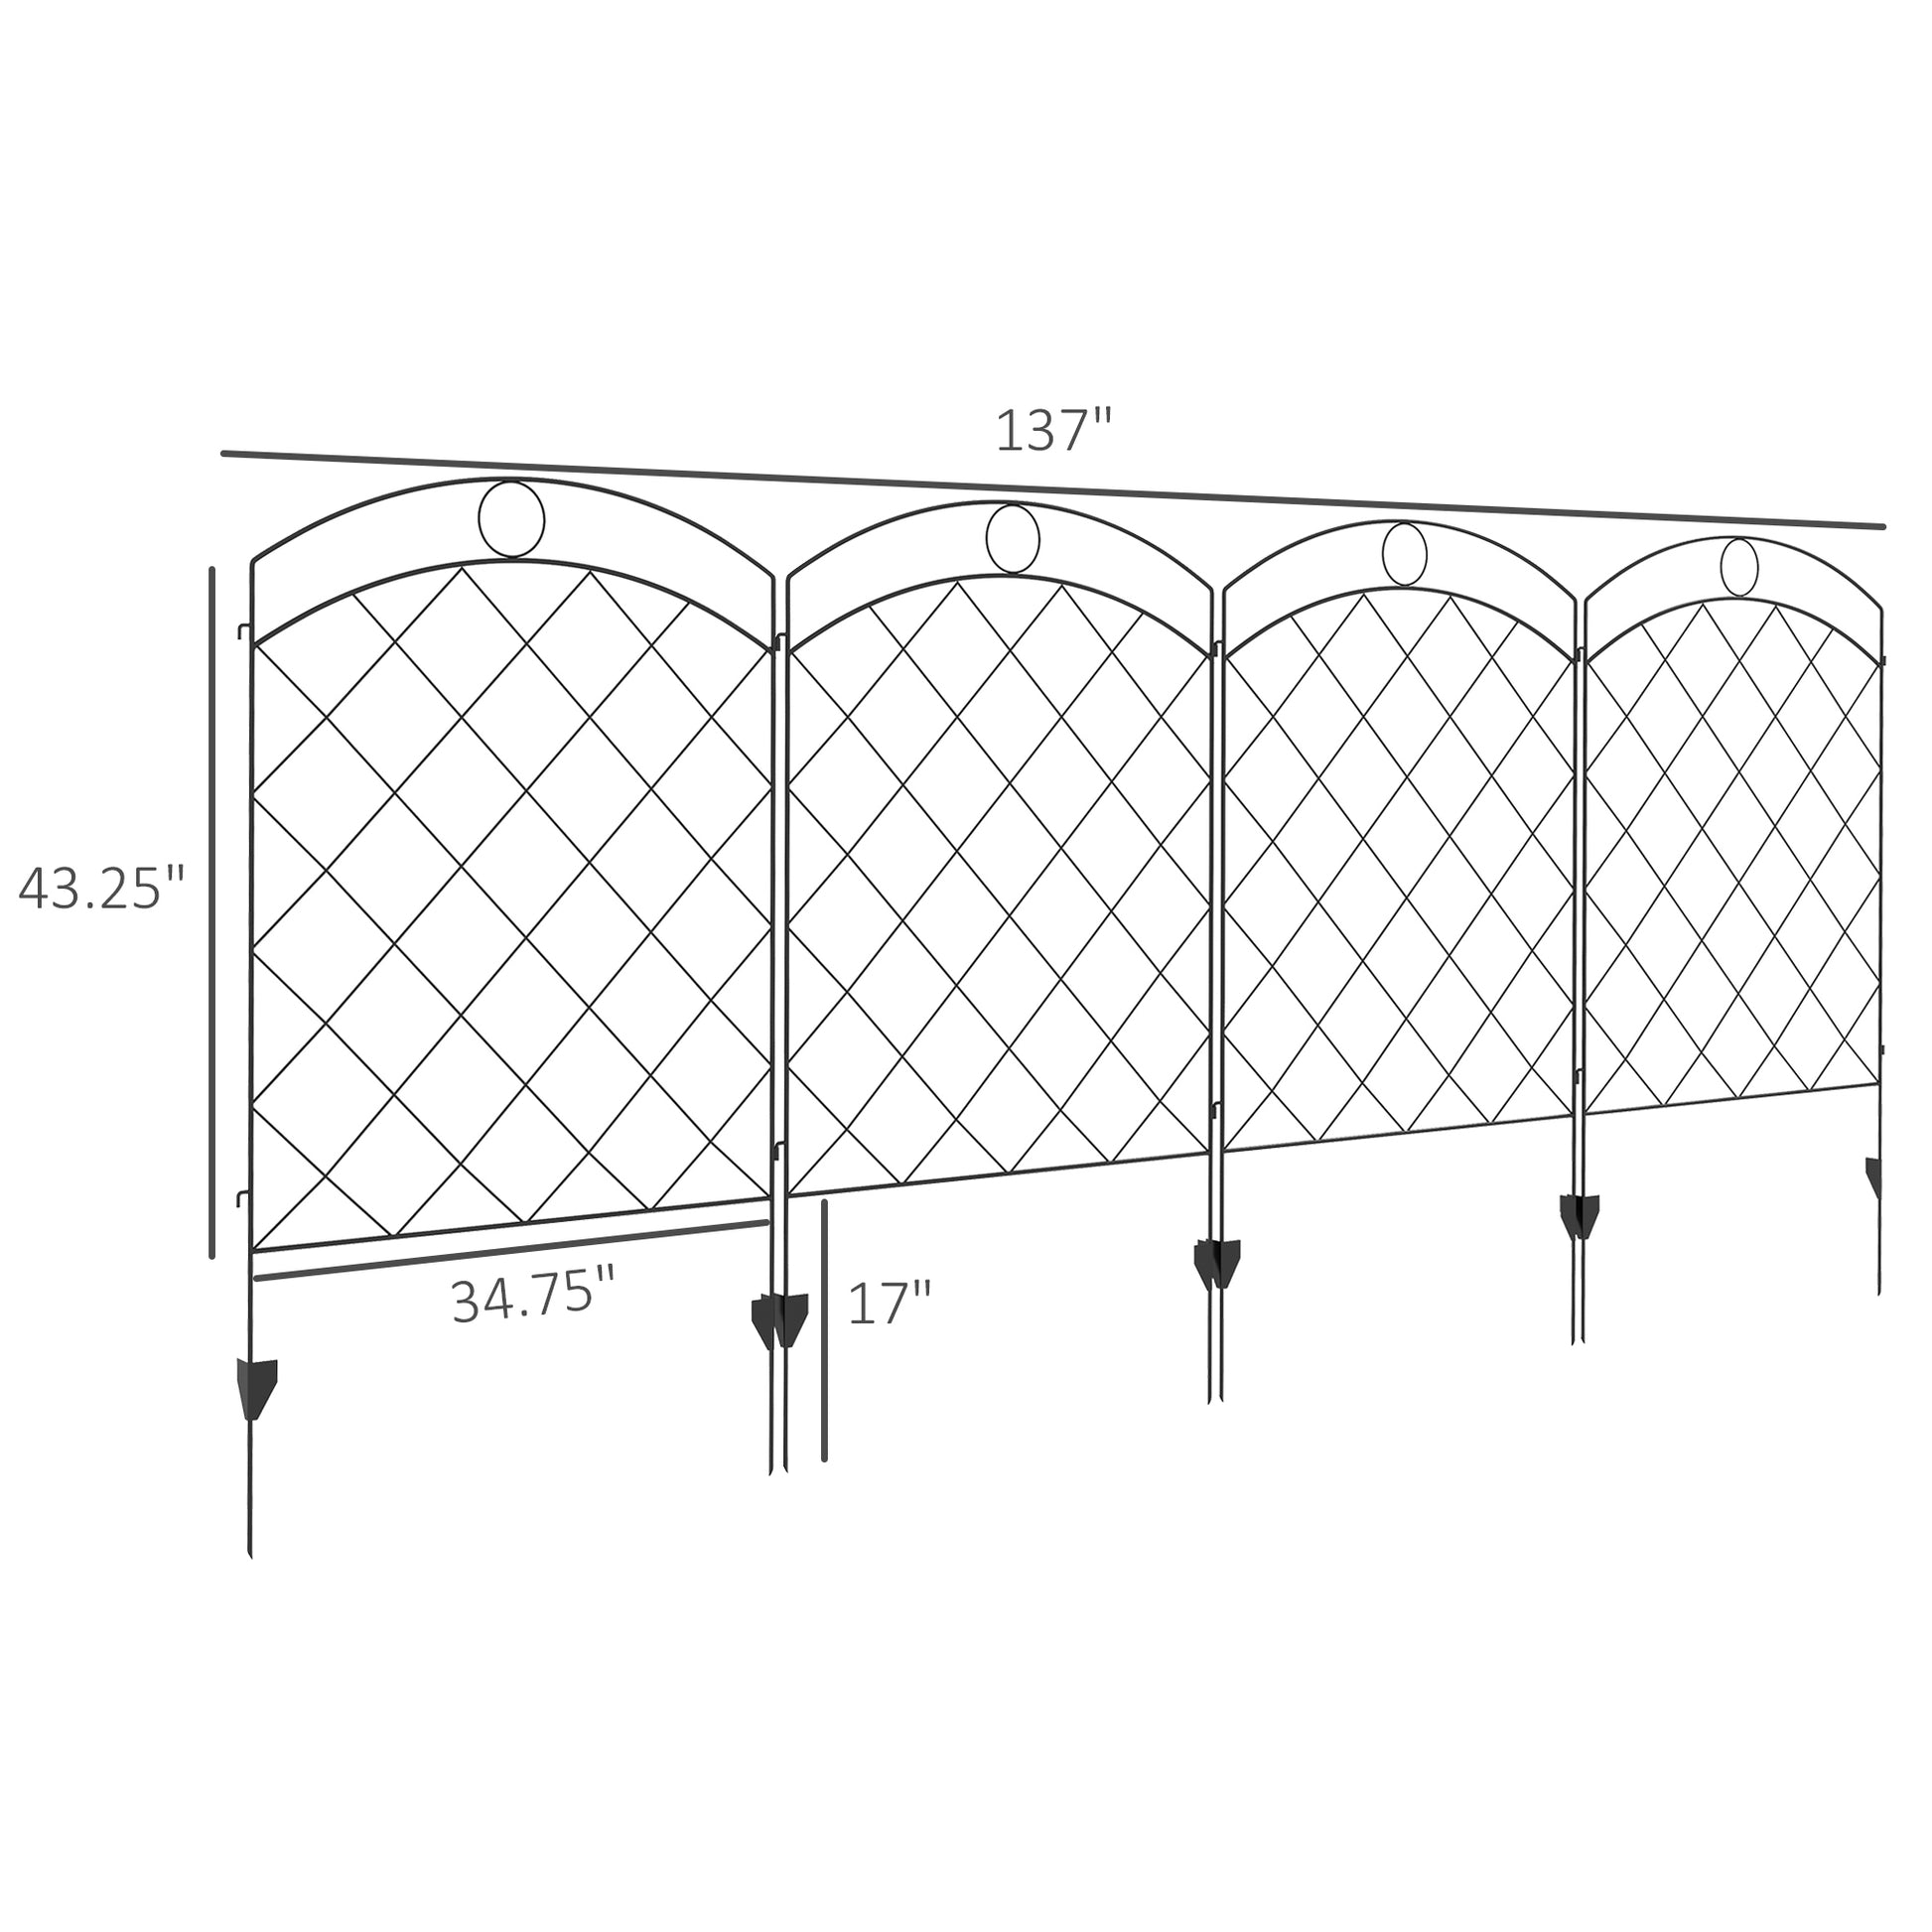 Outsunny Garden Fence, 4 Pack Steel Fence Panels